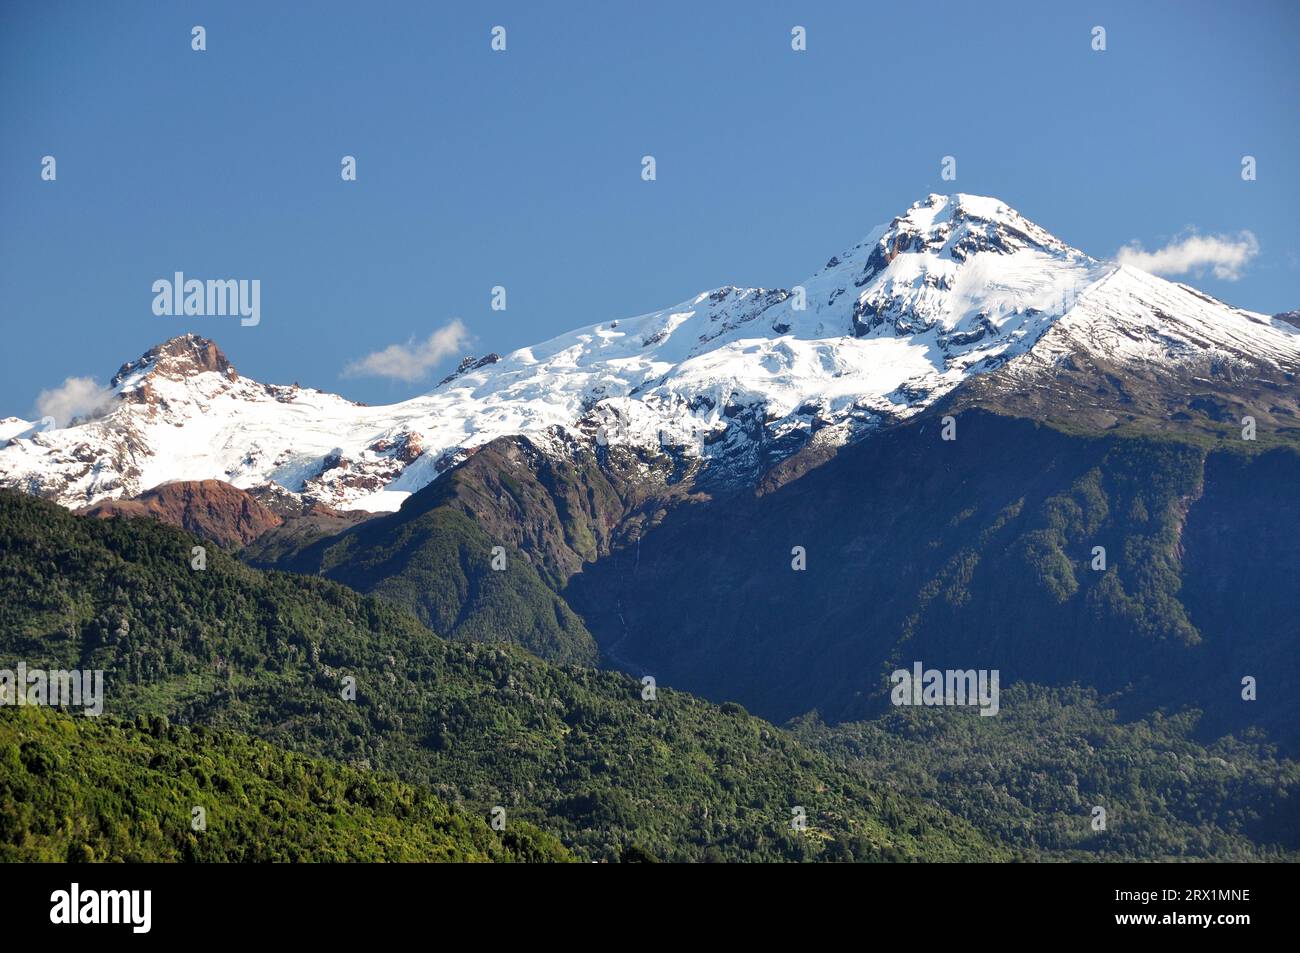 The summit of the snow-capped volcano Yate, Patagonia, Chile Stock Photo